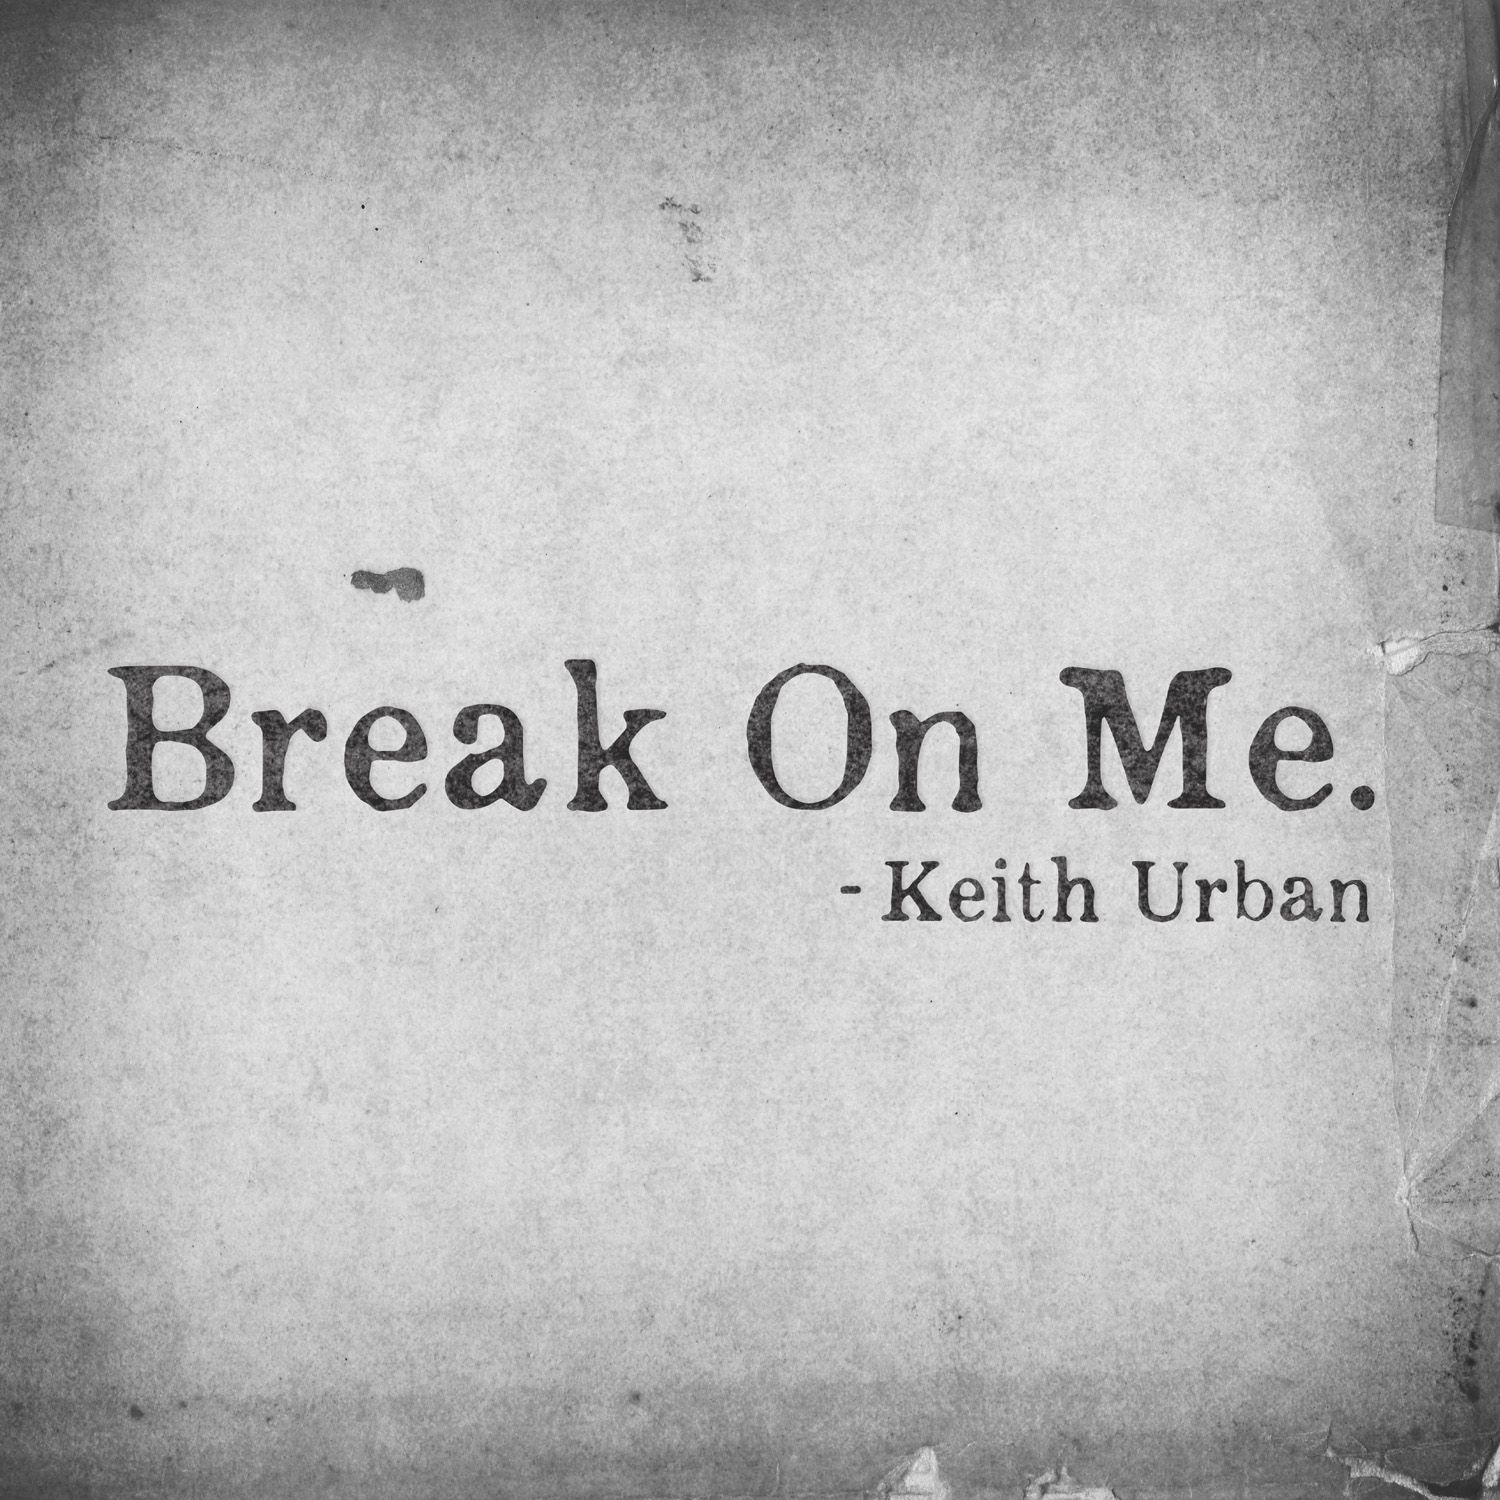 KEITH URBAN REVEALS NEW SINGLE TO FANS